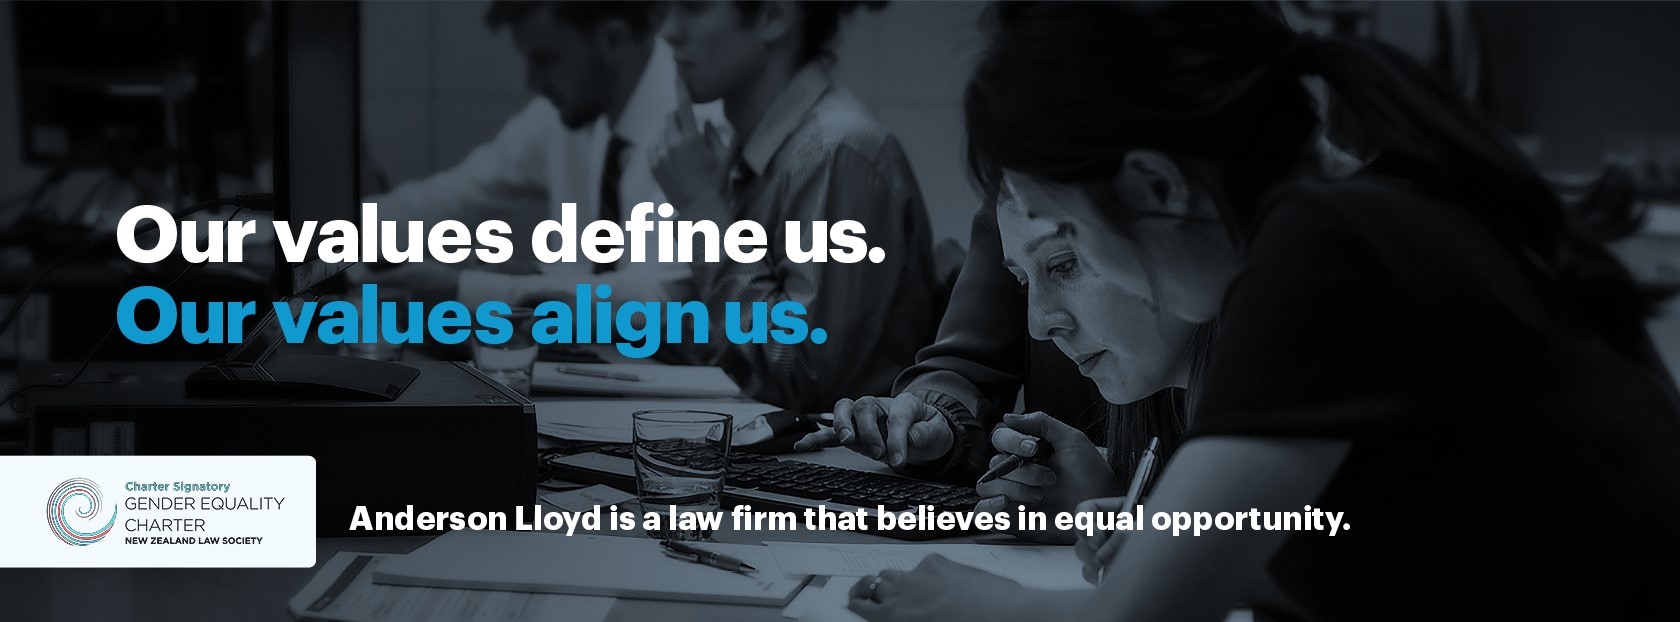 Anderson Lloyd is a law firm that believes in equal opportunity